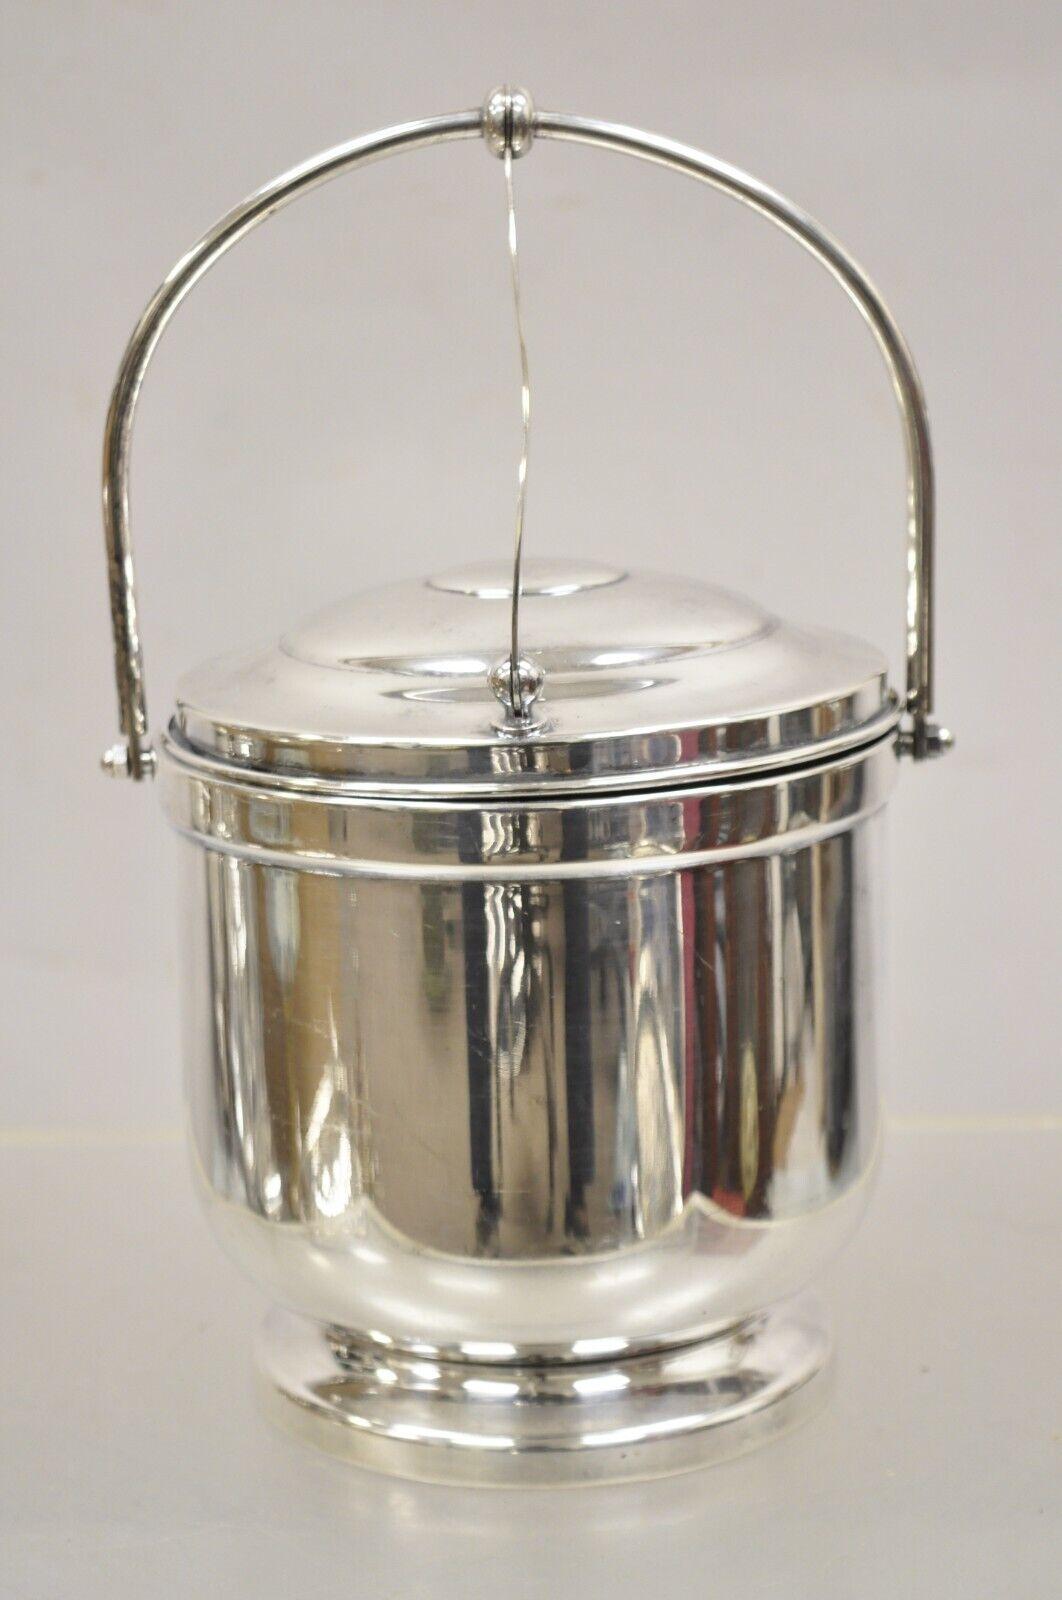 Vintage English Sheffield Silver Plated Reticulated Hinged Handle Lidded Ice Bucket. Item features mercury glass, 